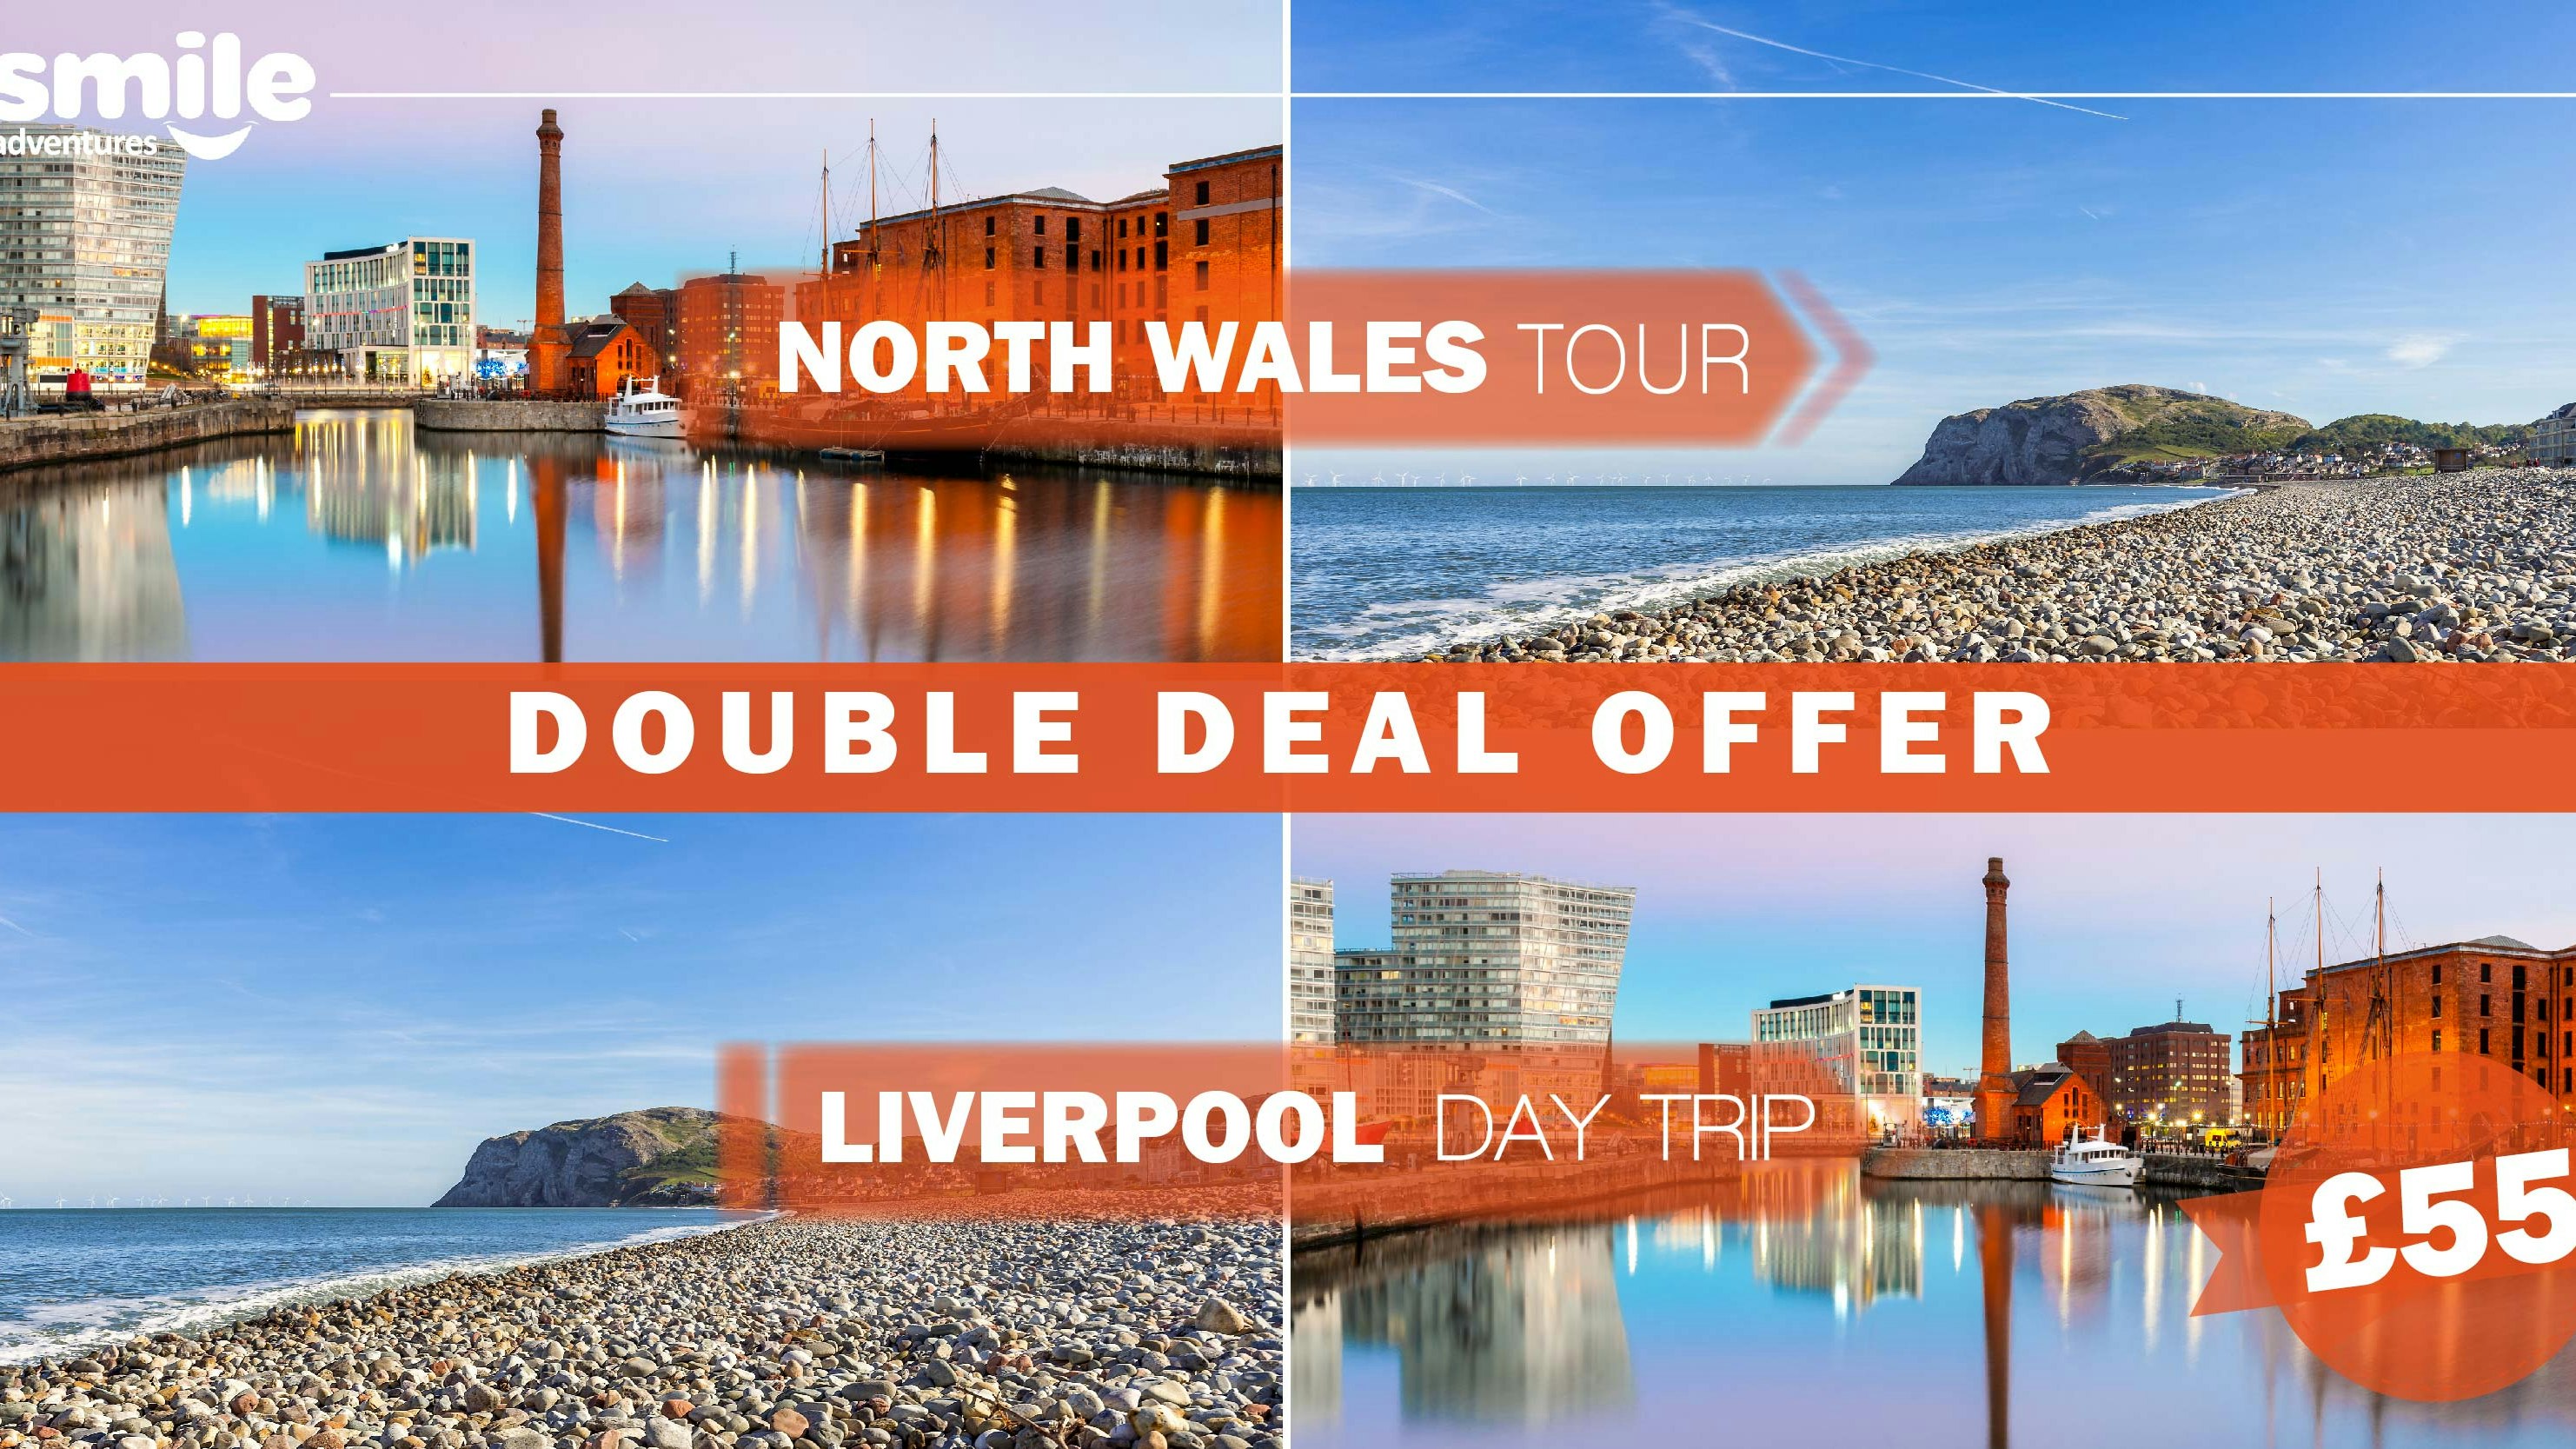 DOUBLE DEAL – Liverpool Day Trip 11.06.2022 / North Wales Tour 12.06.2022